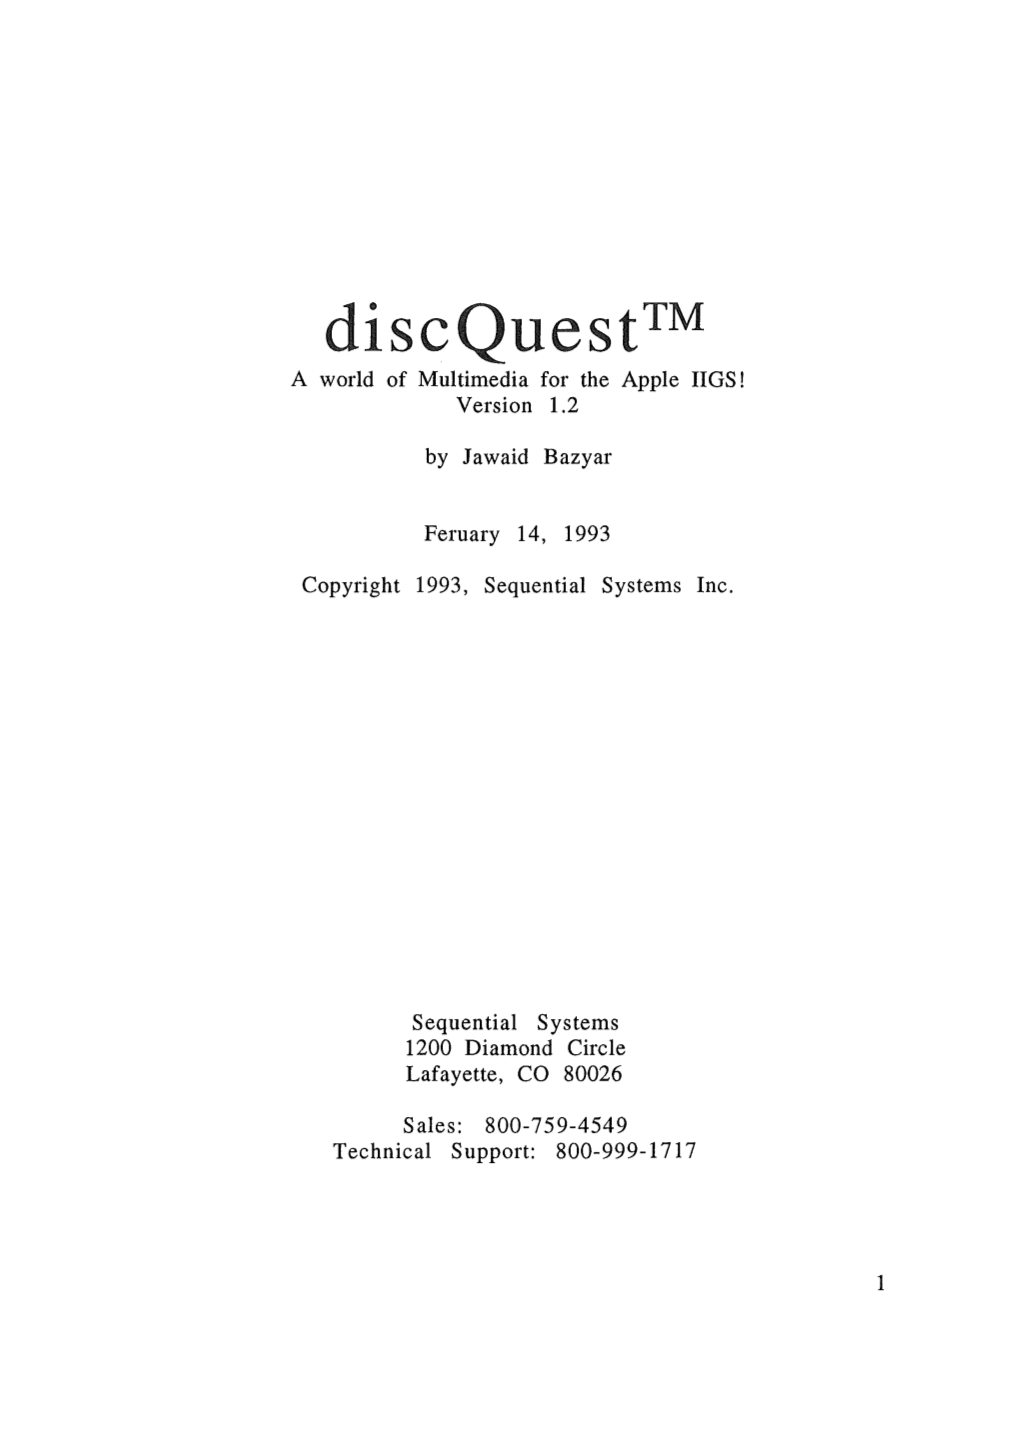 Discquesttm a World of Multimedia for the Apple IIGS! Version 1.2